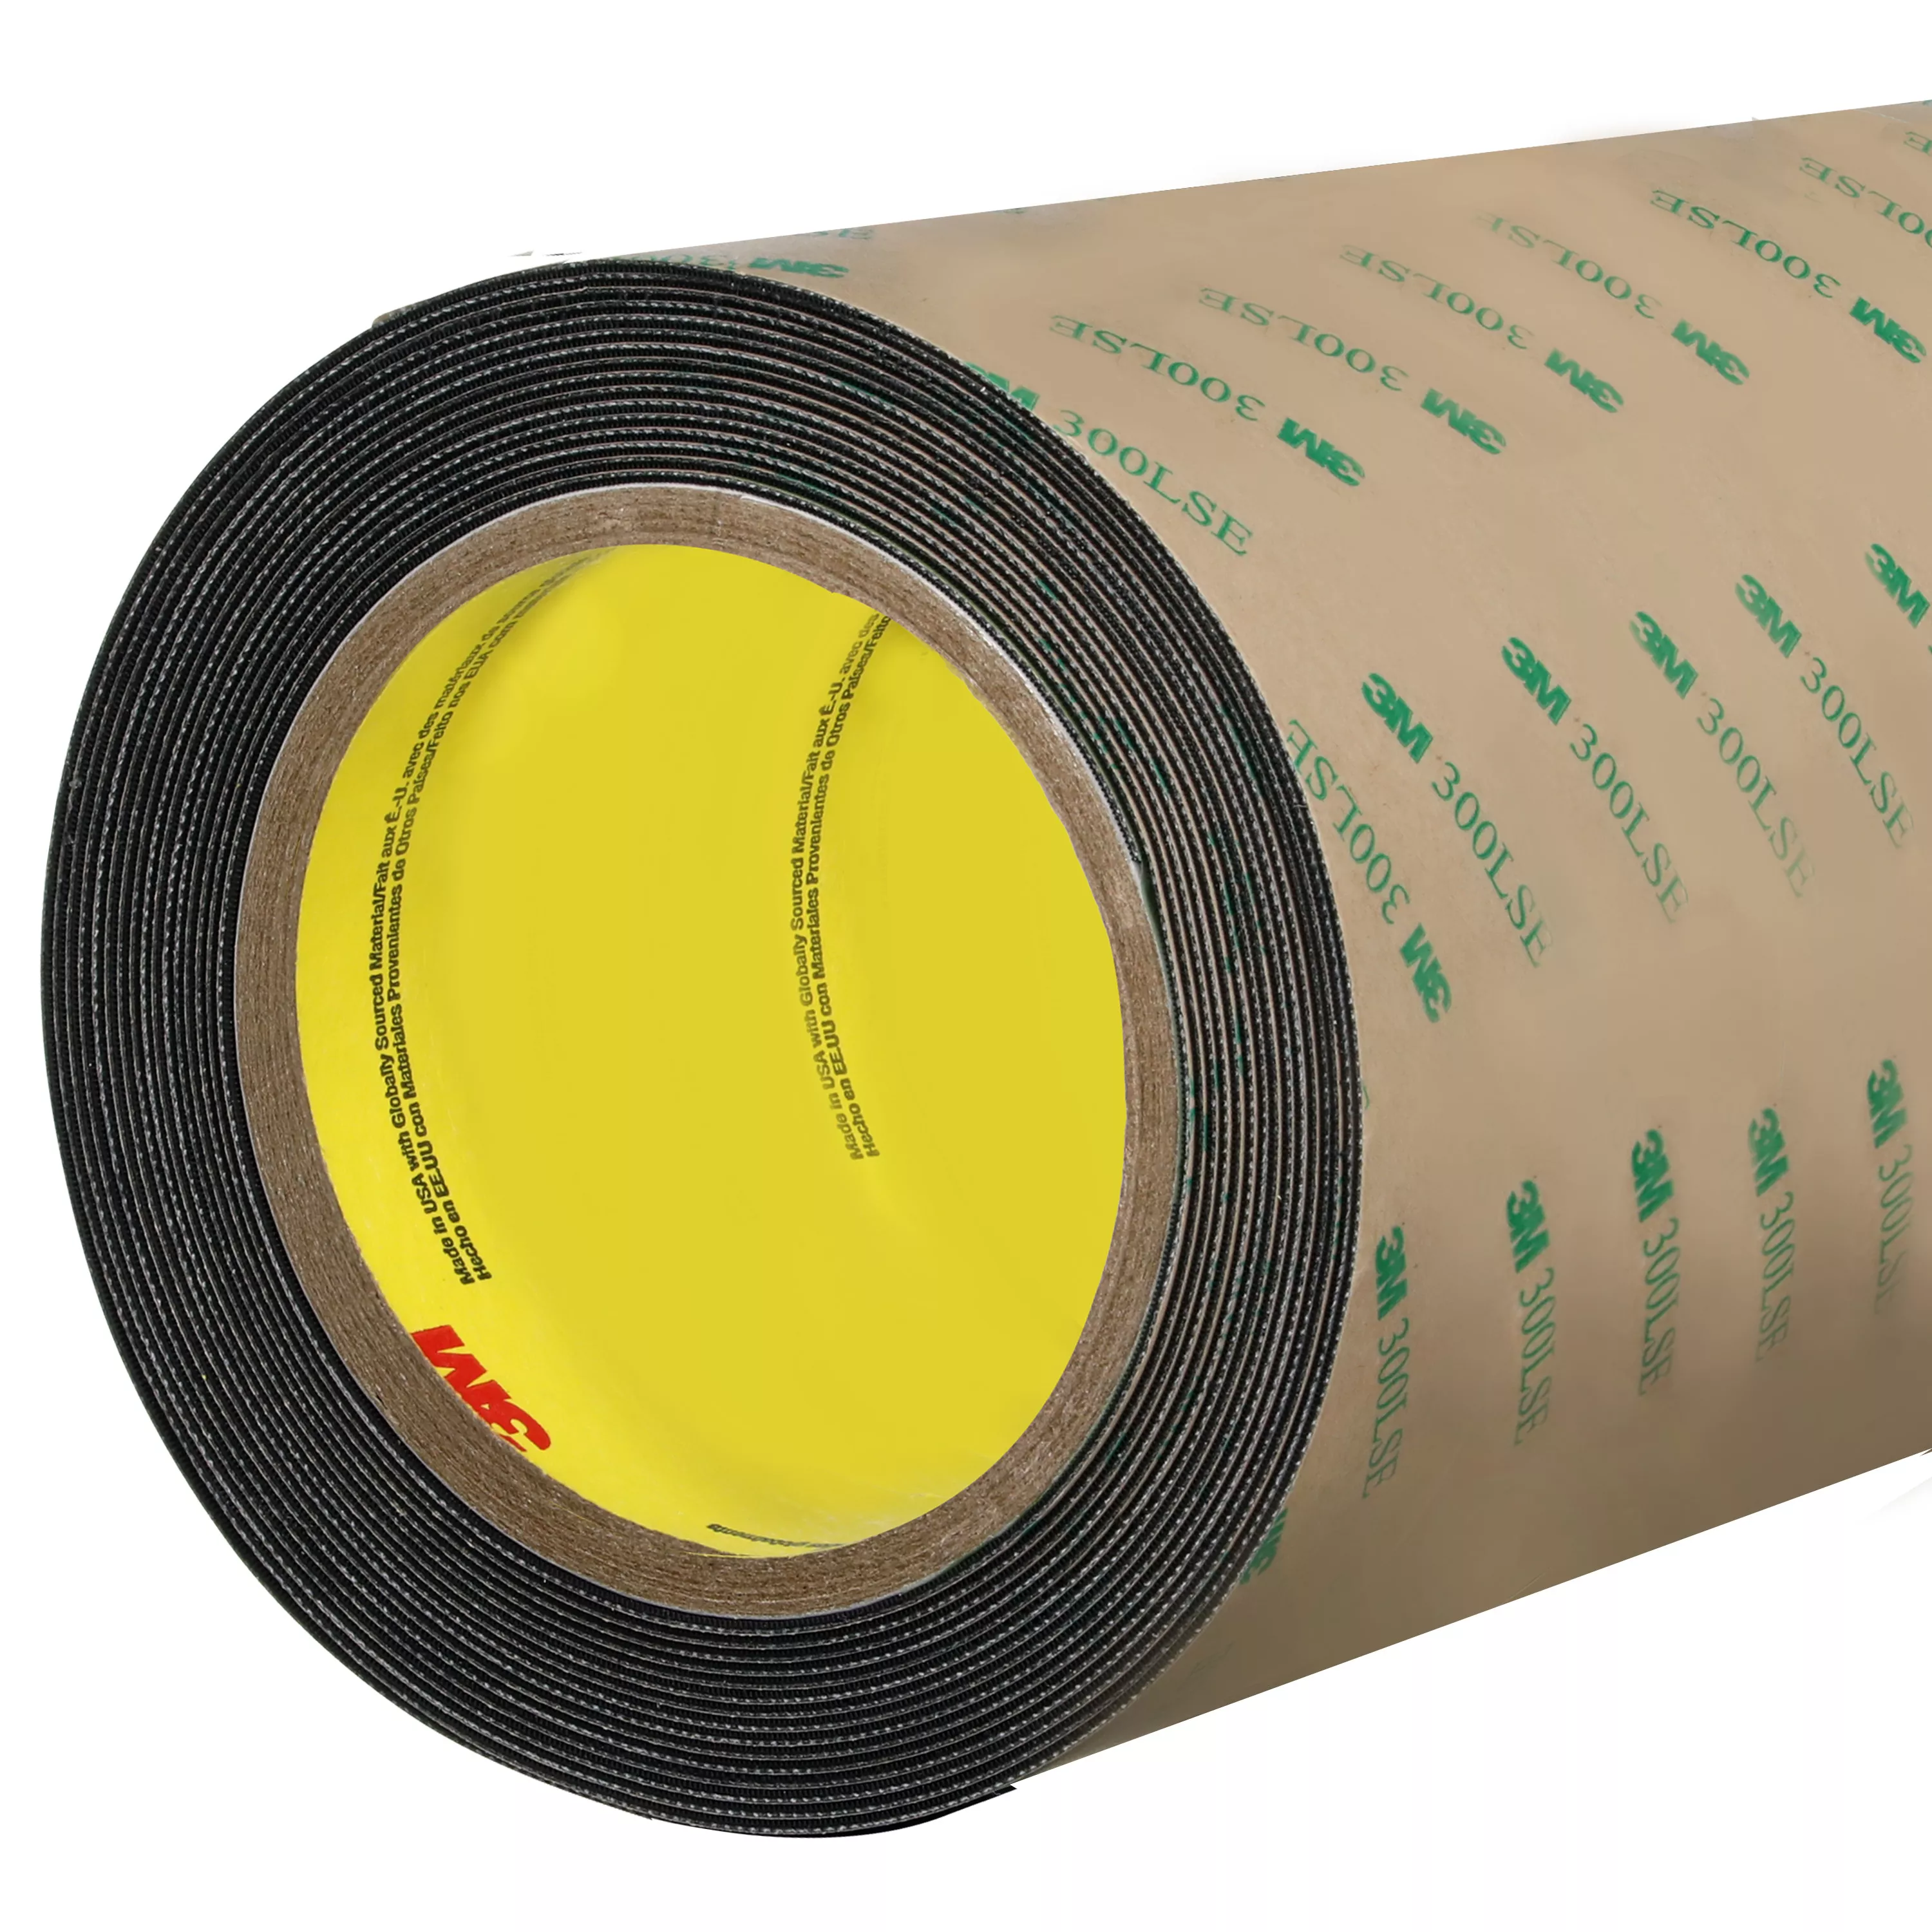 3M™ Gripping Material GM640, Black, 24 in x 72 yd, 1 Roll/Case